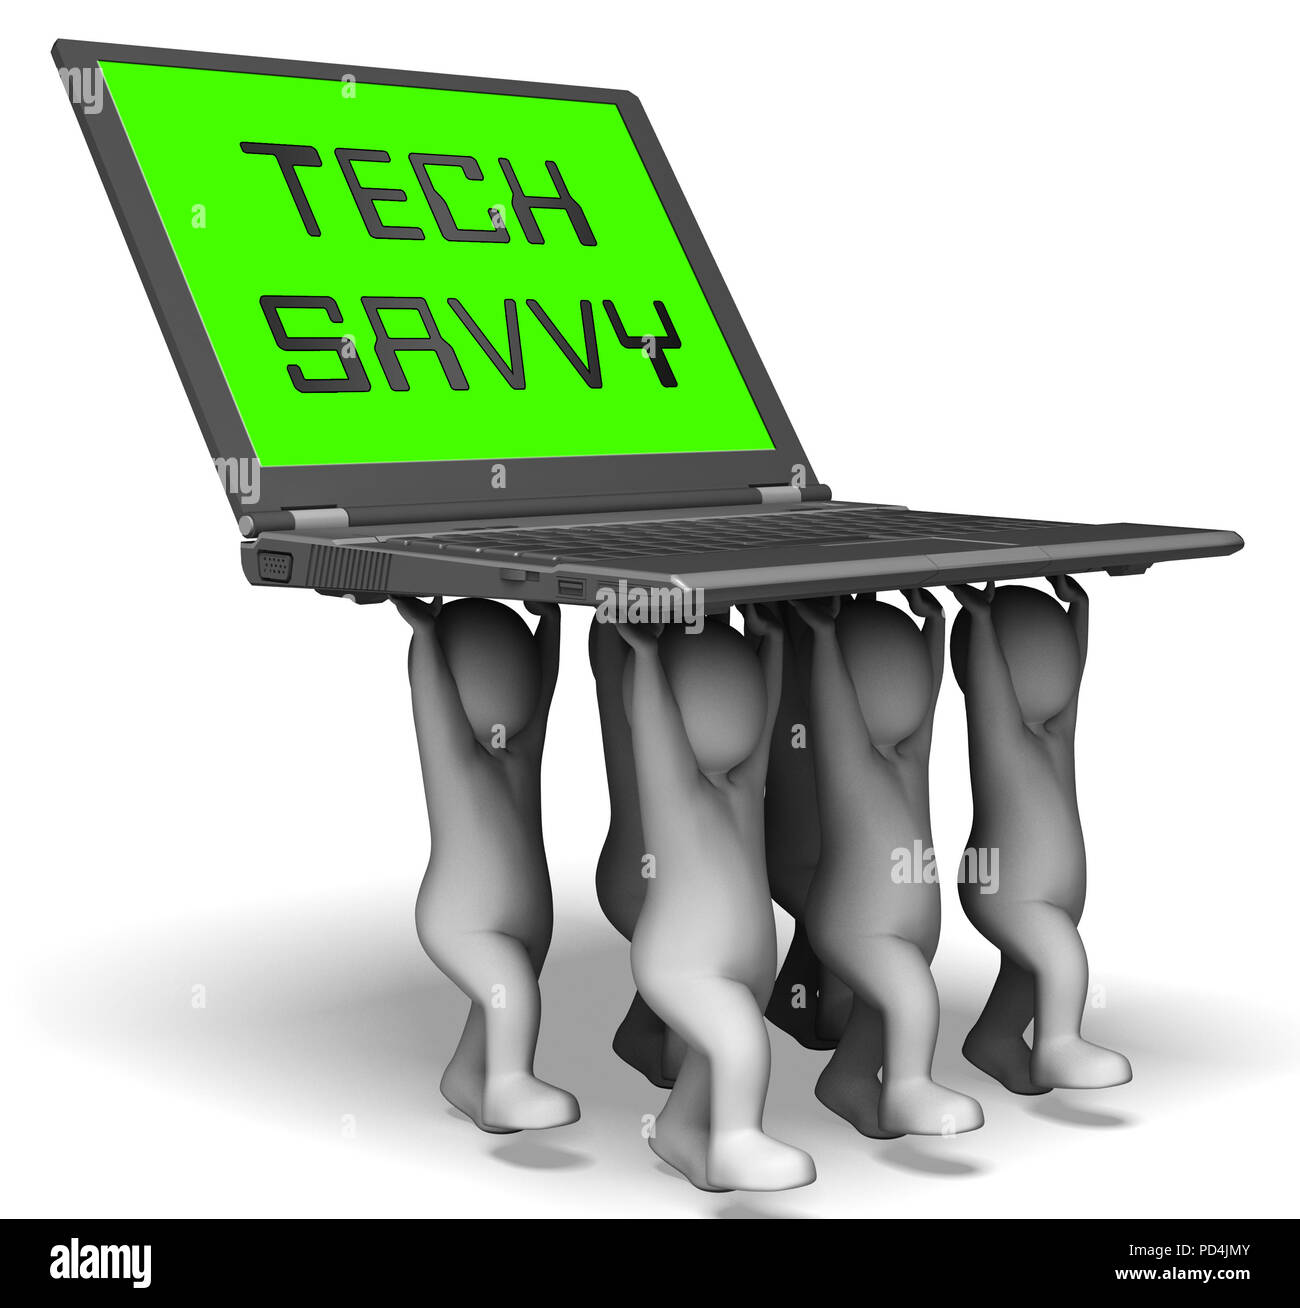 Tech Savvy Digital Computer Expert 3d Rendering Means Hitech Smart Professional Technical Expertise Stock Photo